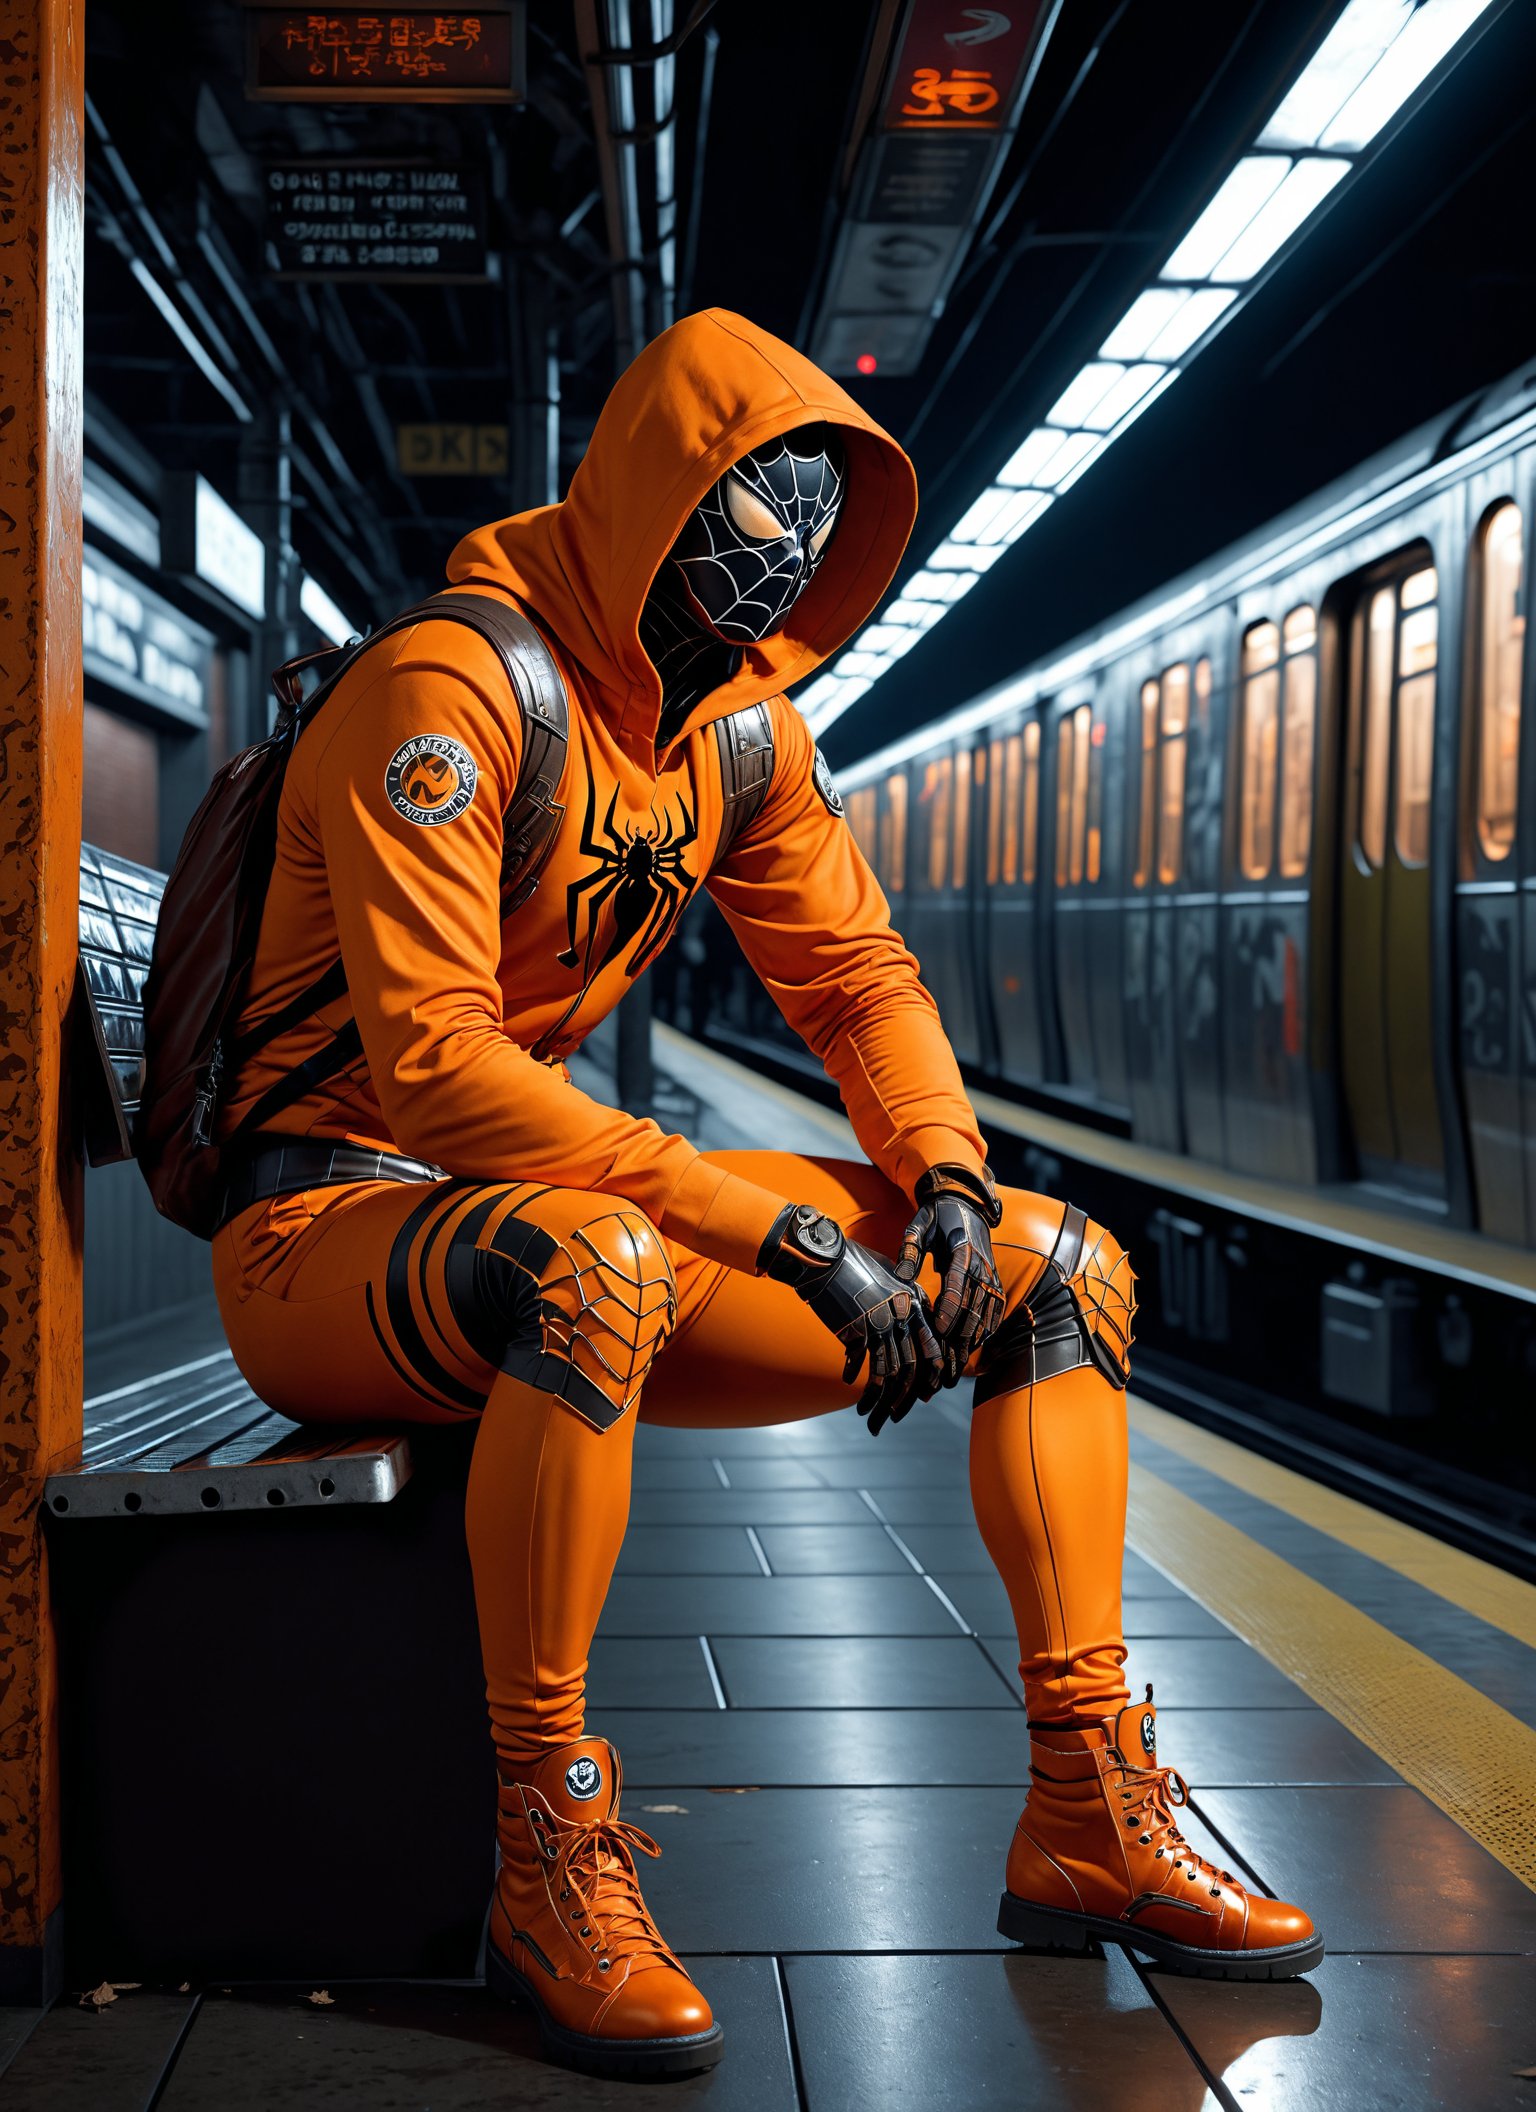 photorealistic Masterpiece, 8K photo, Cinematic quality, (Man in Pumpkin Spice Orange rmspdvrs:1.2), spider logo, armored clothes, (Reflective surfaces:1.2), Steel embellishments, Sitting on a Stool, Legs Crossed, (Moonlit Abandoned Subway Station Platform:1.3), Captured with ultra-high-definition camera, Best detailed resolution, Realistic depth <lora:Armor from HaDeS XL v3.4 Lite:1> <lora:Image Enhancer XL Extreme v1:0.2> . highly detailed, lifelike, precise, accurate